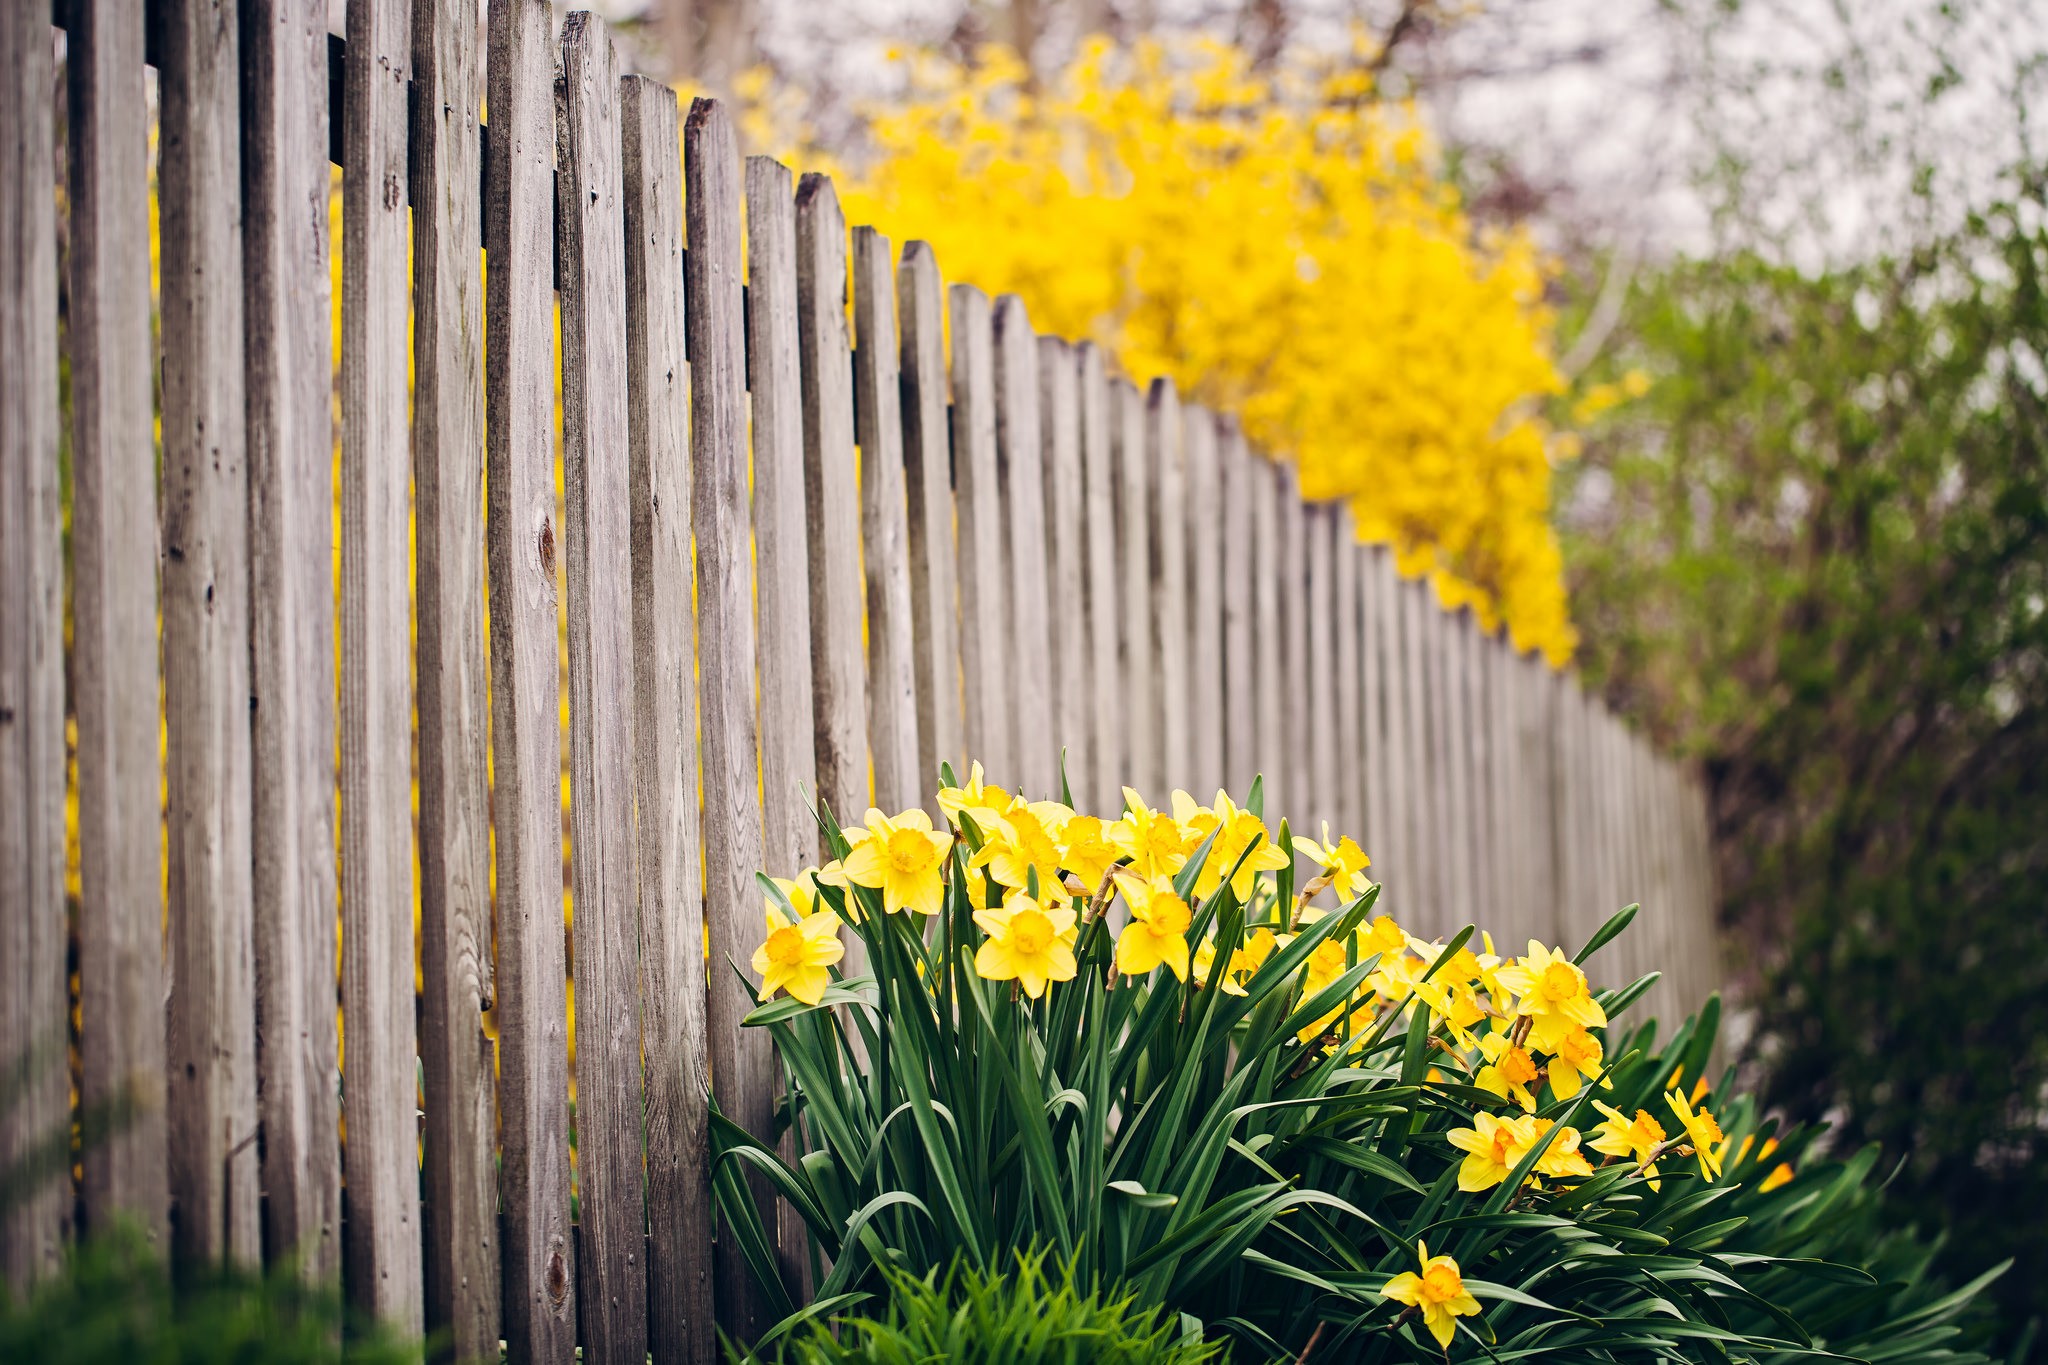 General 2048x1365 fence flowers daffodils yellow flowers depth of field plants outdoors